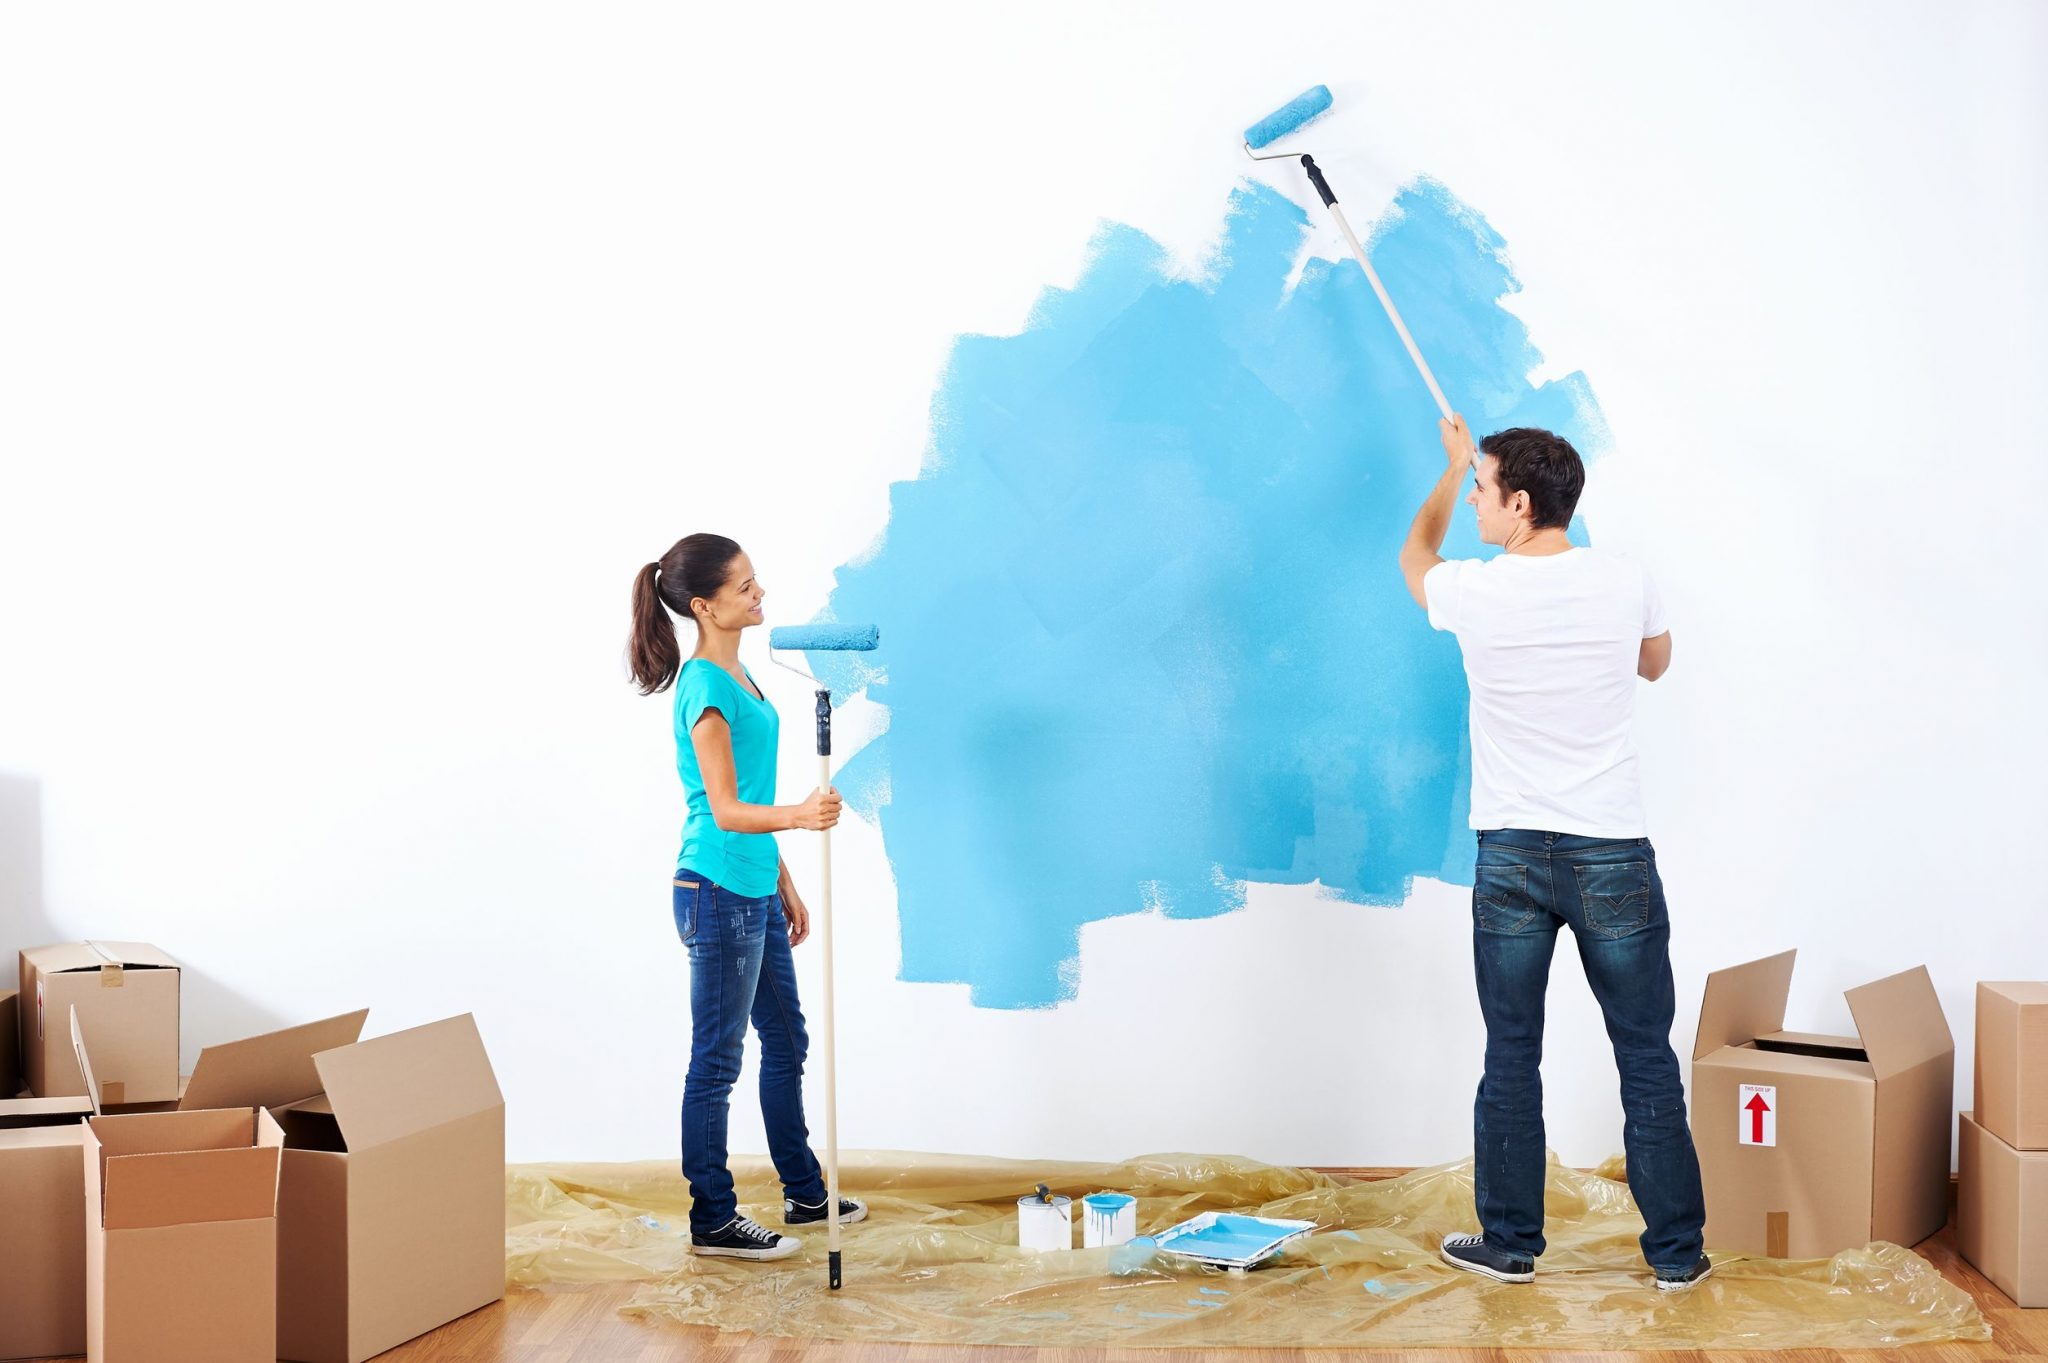 how to paint a room